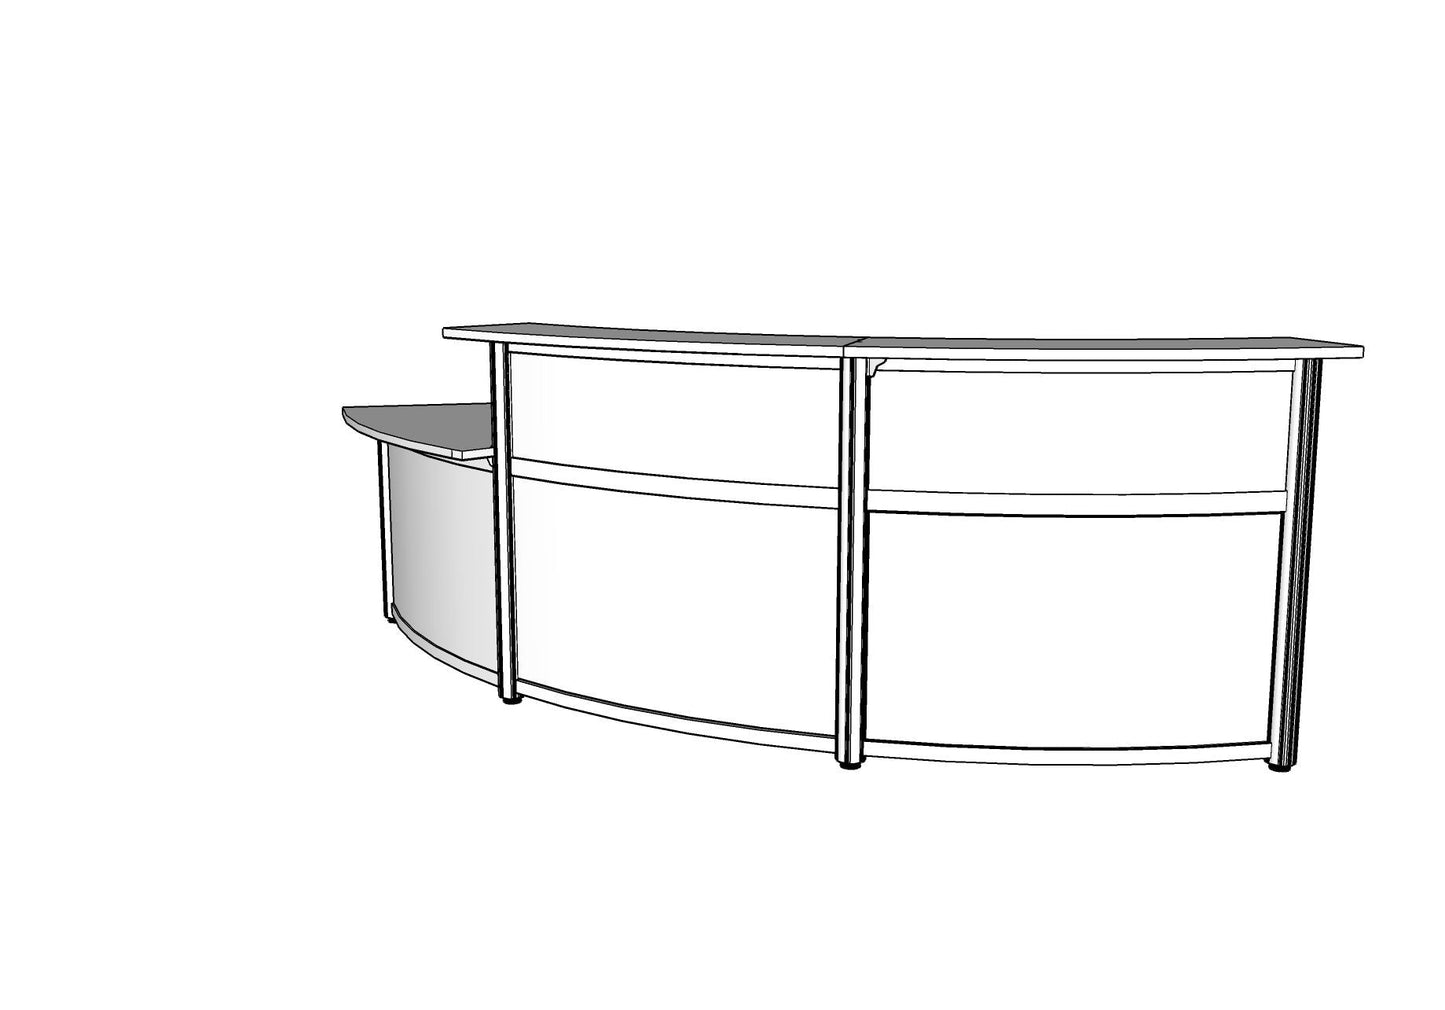 Curved Beam, Corner Reception with Front Curve PBR016